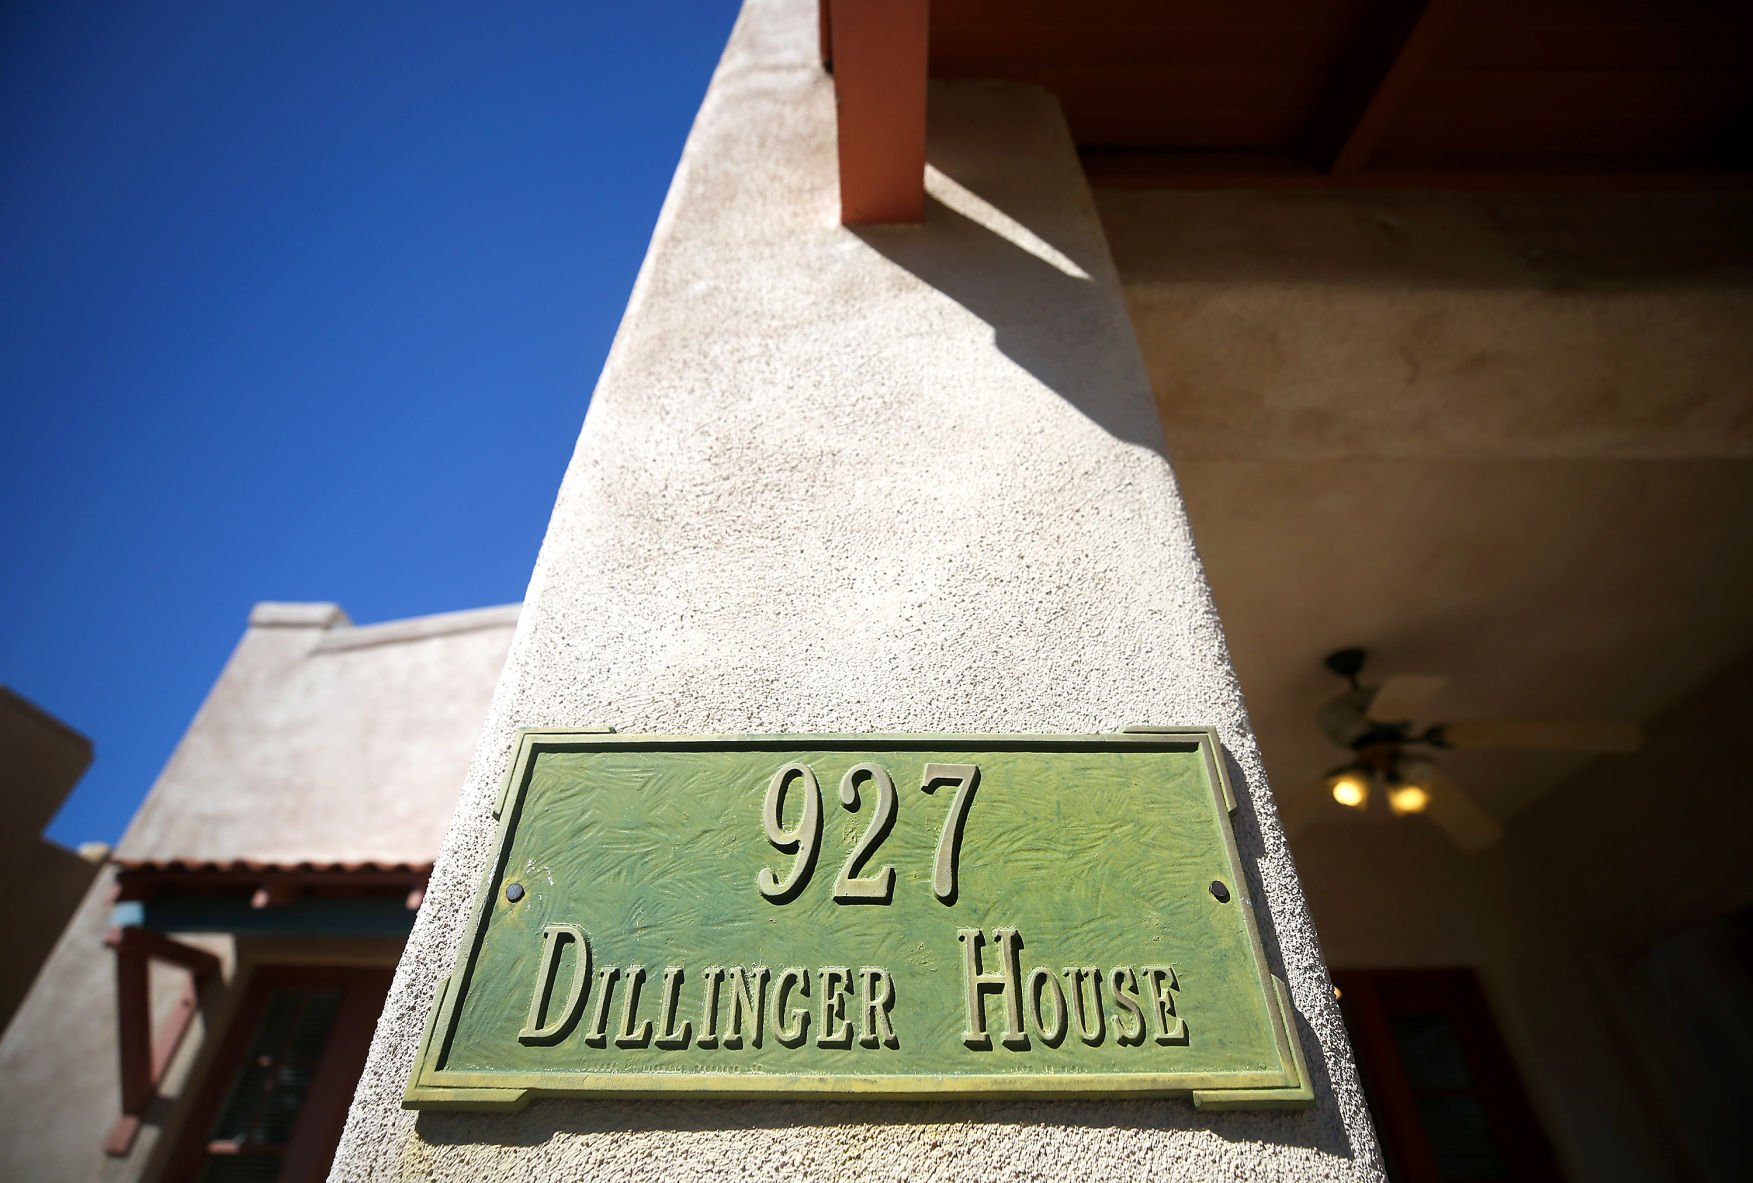 Calling all bank robbers: Tucson's 'Dillinger house' is up for